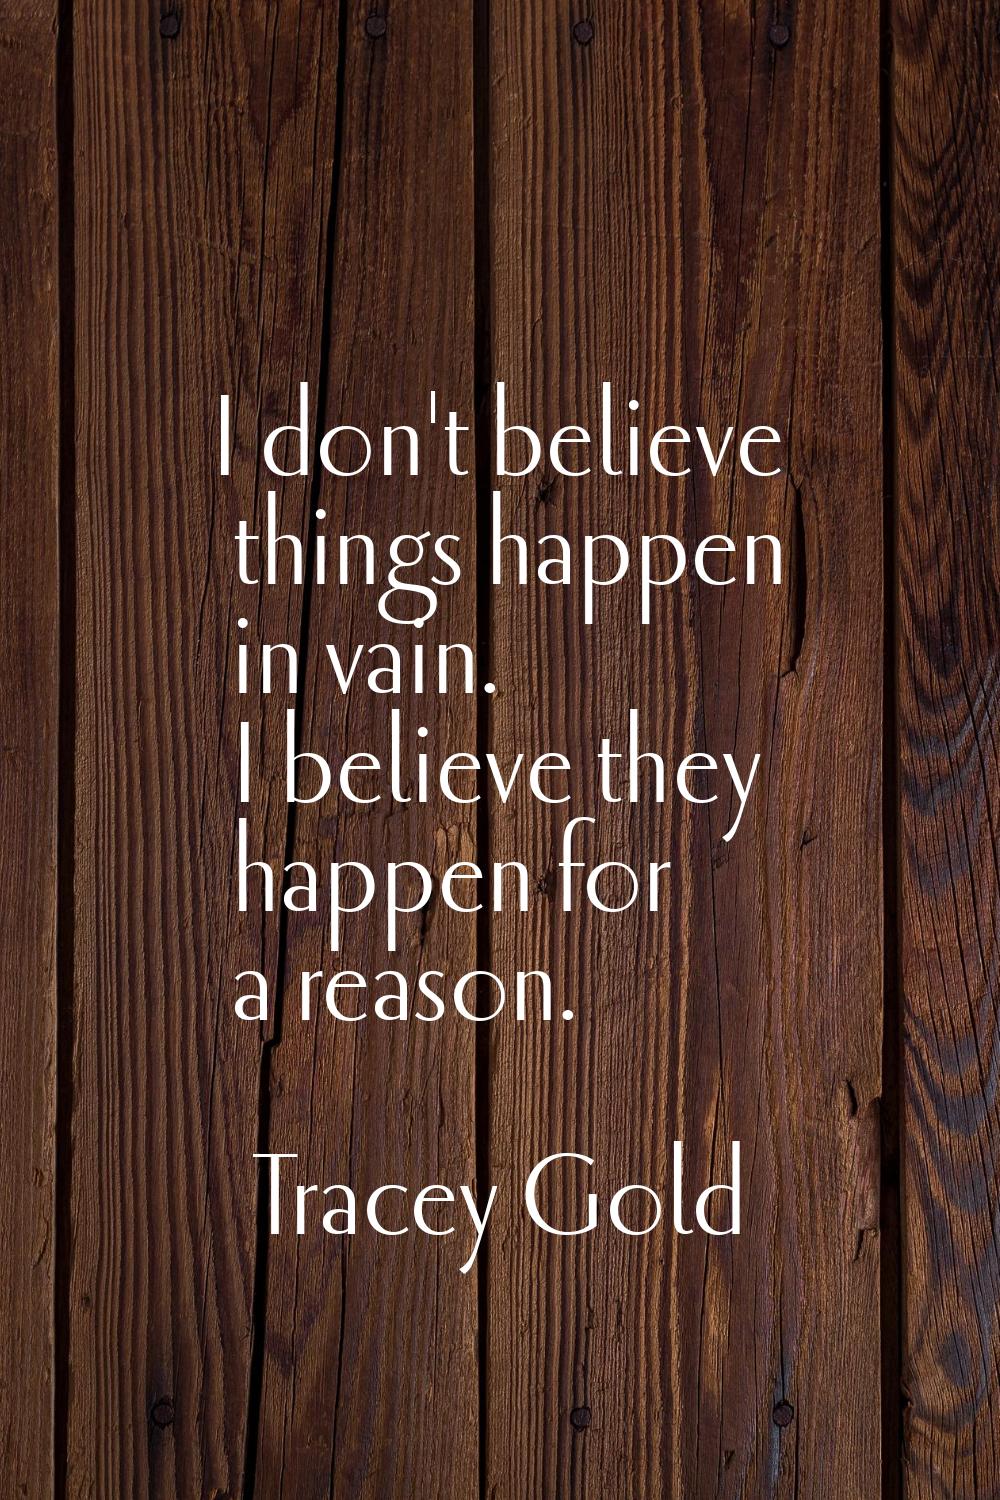 I don't believe things happen in vain. I believe they happen for a reason.